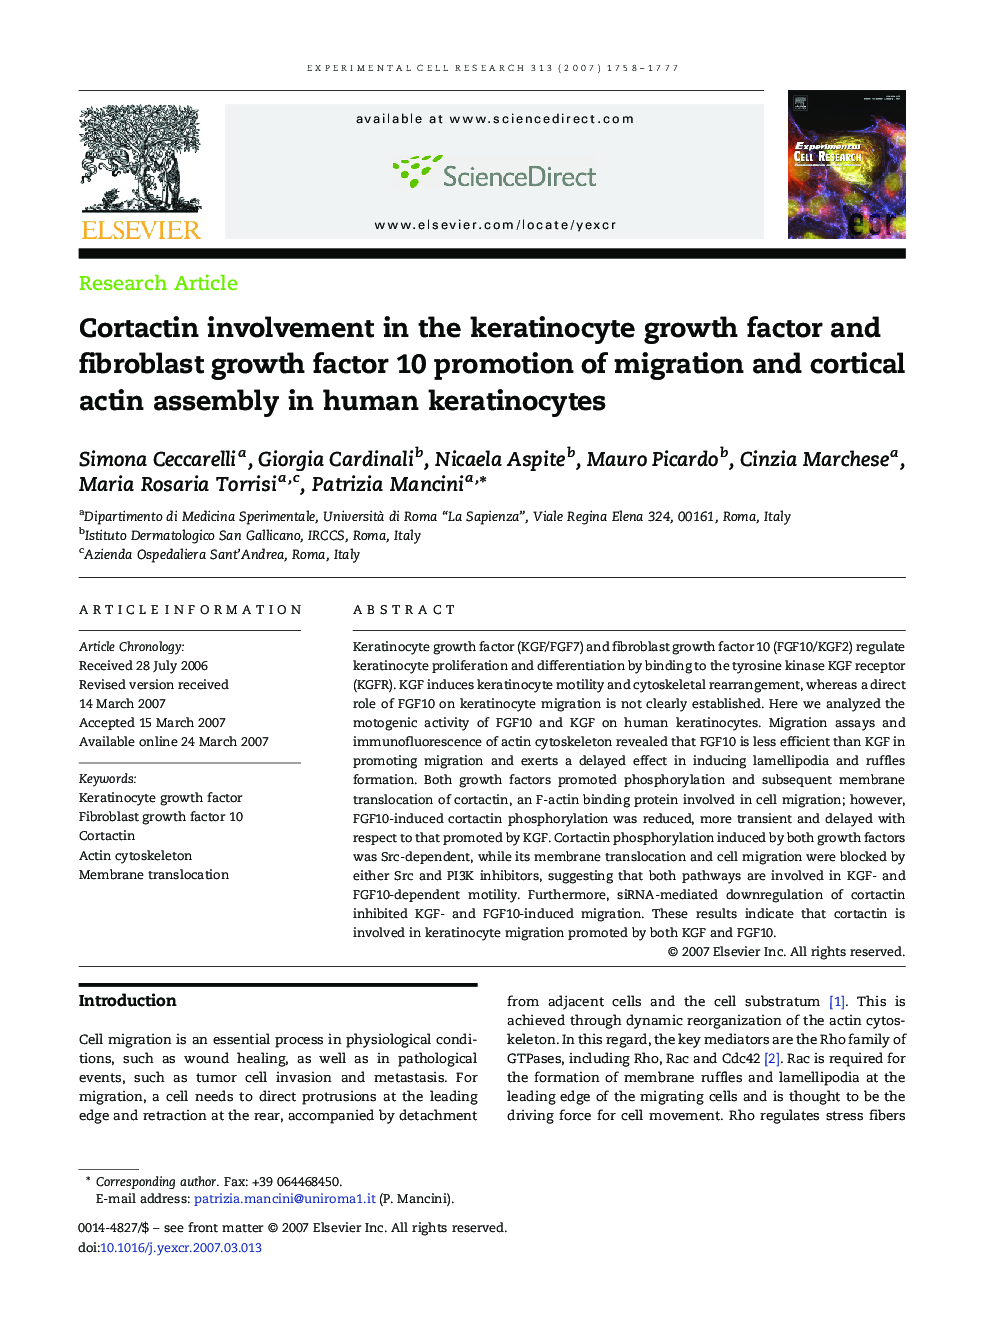 Cortactin involvement in the keratinocyte growth factor and fibroblast growth factor 10 promotion of migration and cortical actin assembly in human keratinocytes